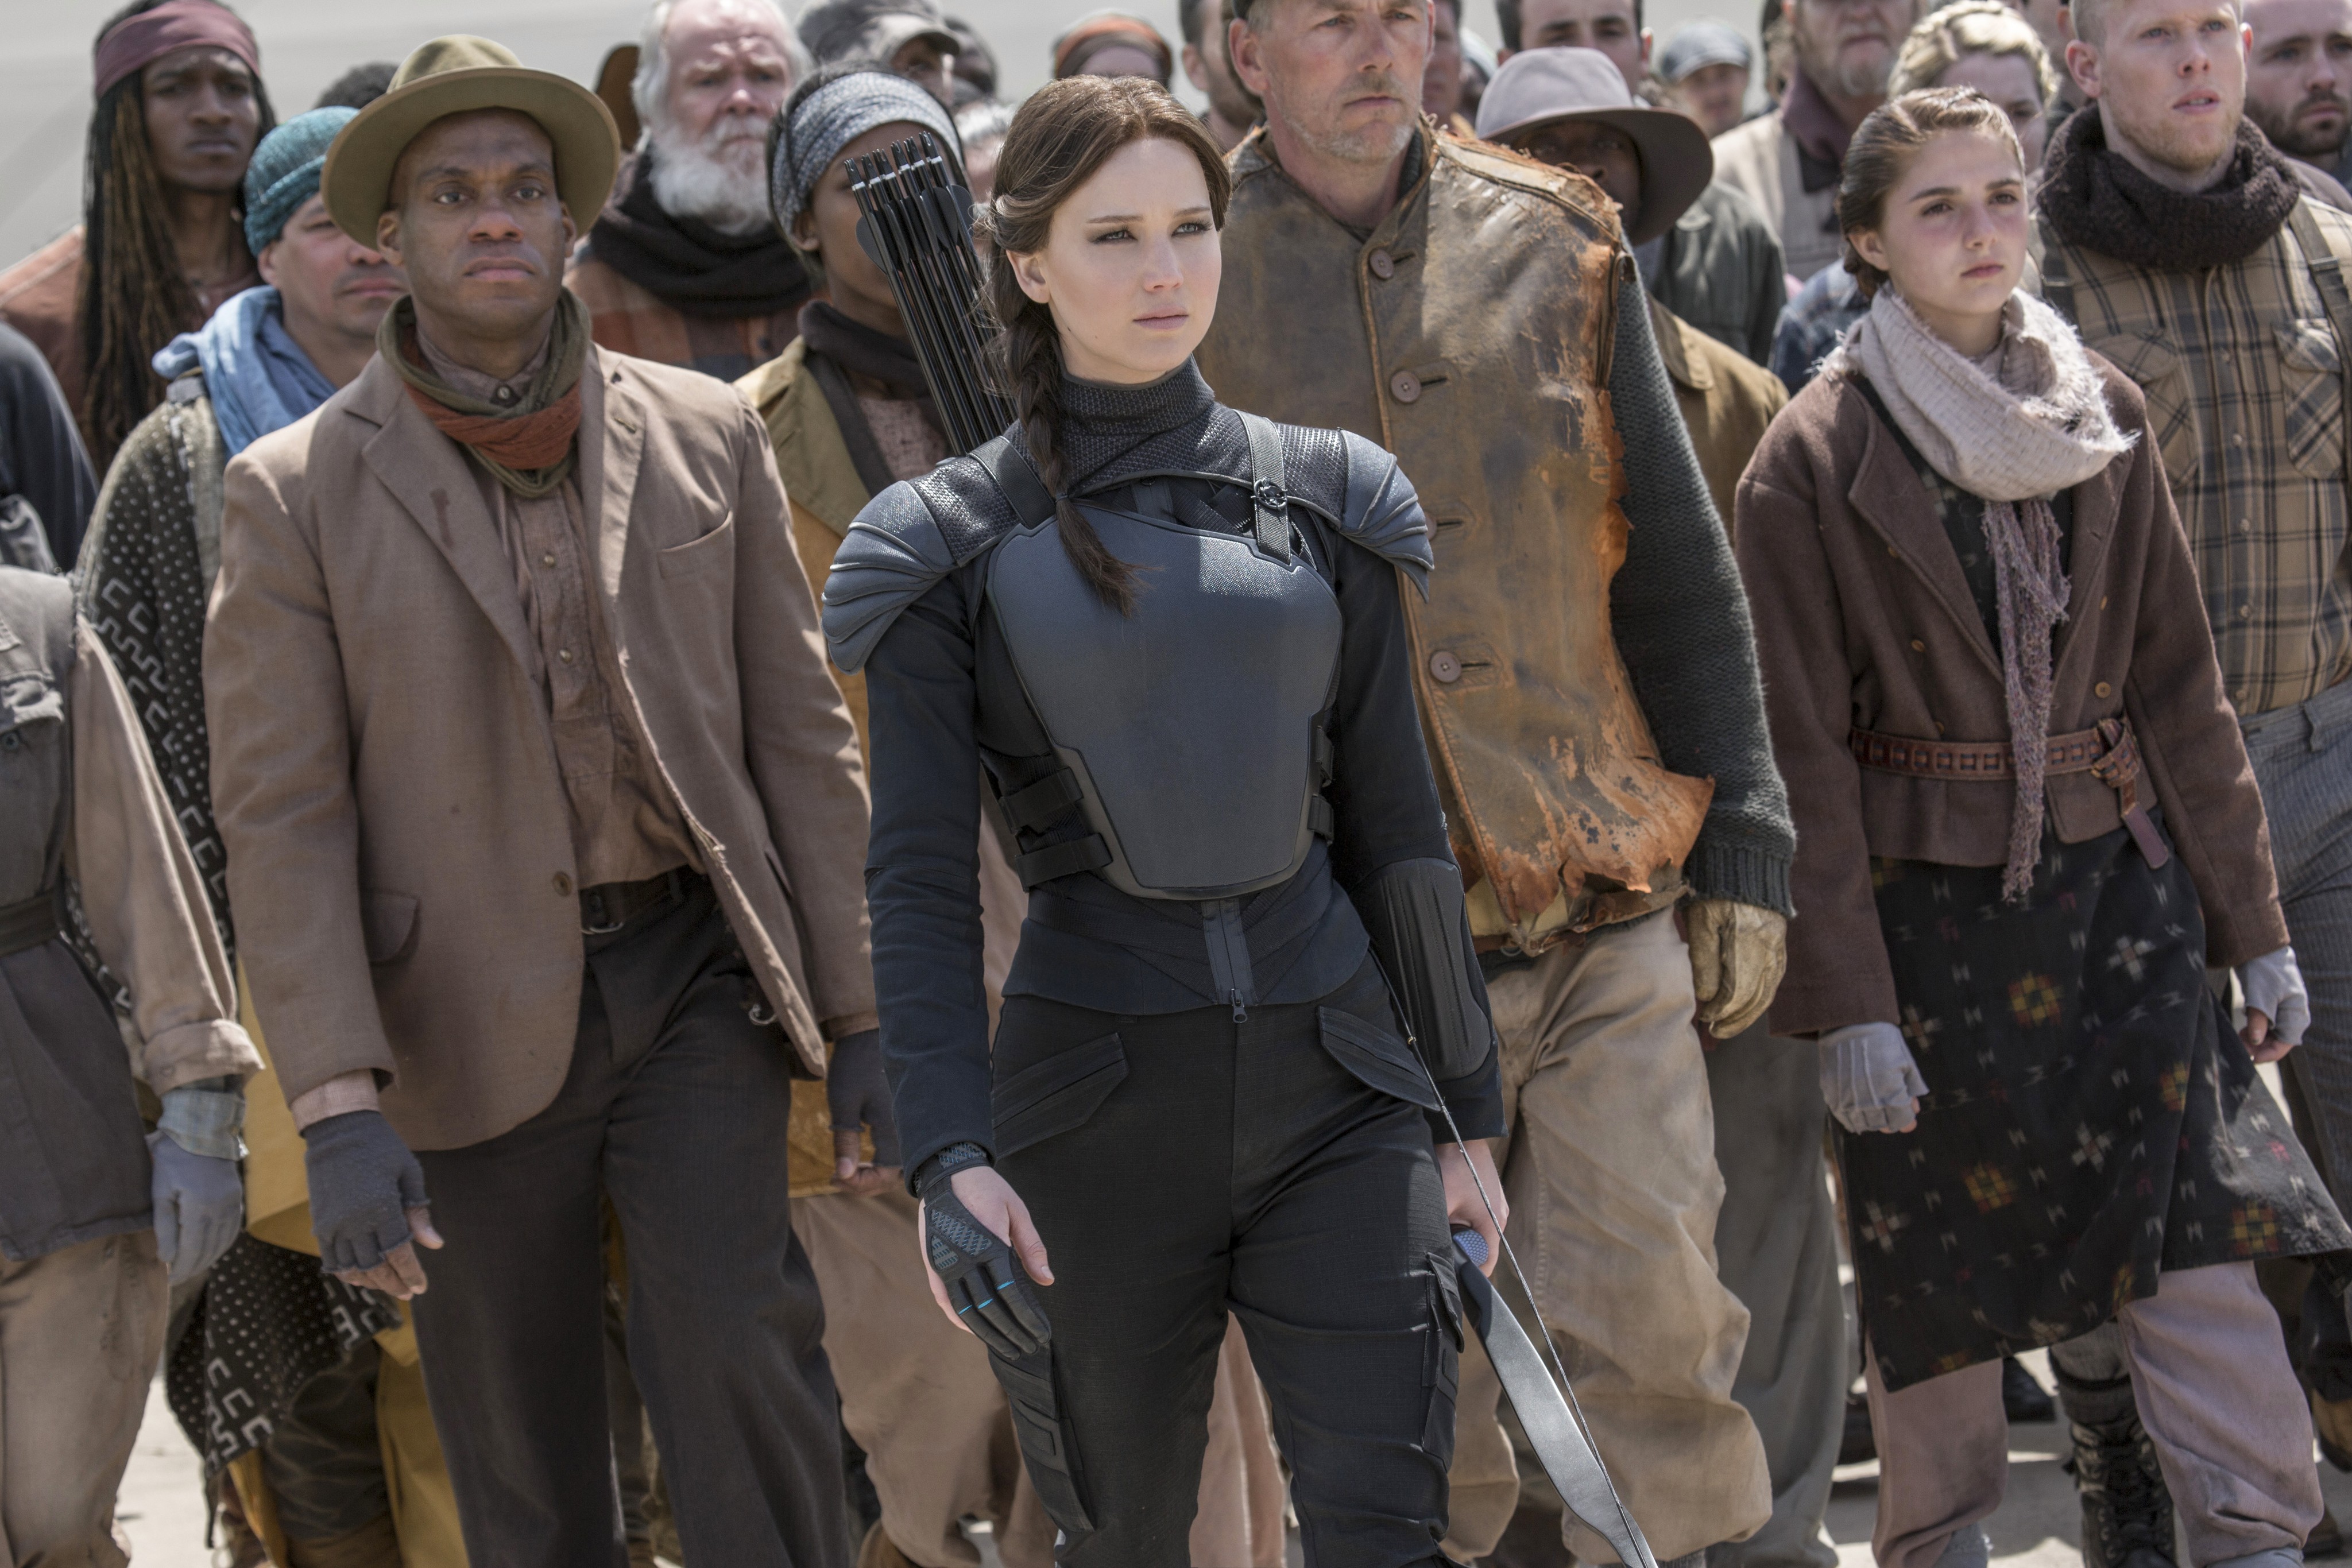 The Hunger Games Mockingjay Part 2 Final Trailer Trailers And Videos Rotten Tomatoes 